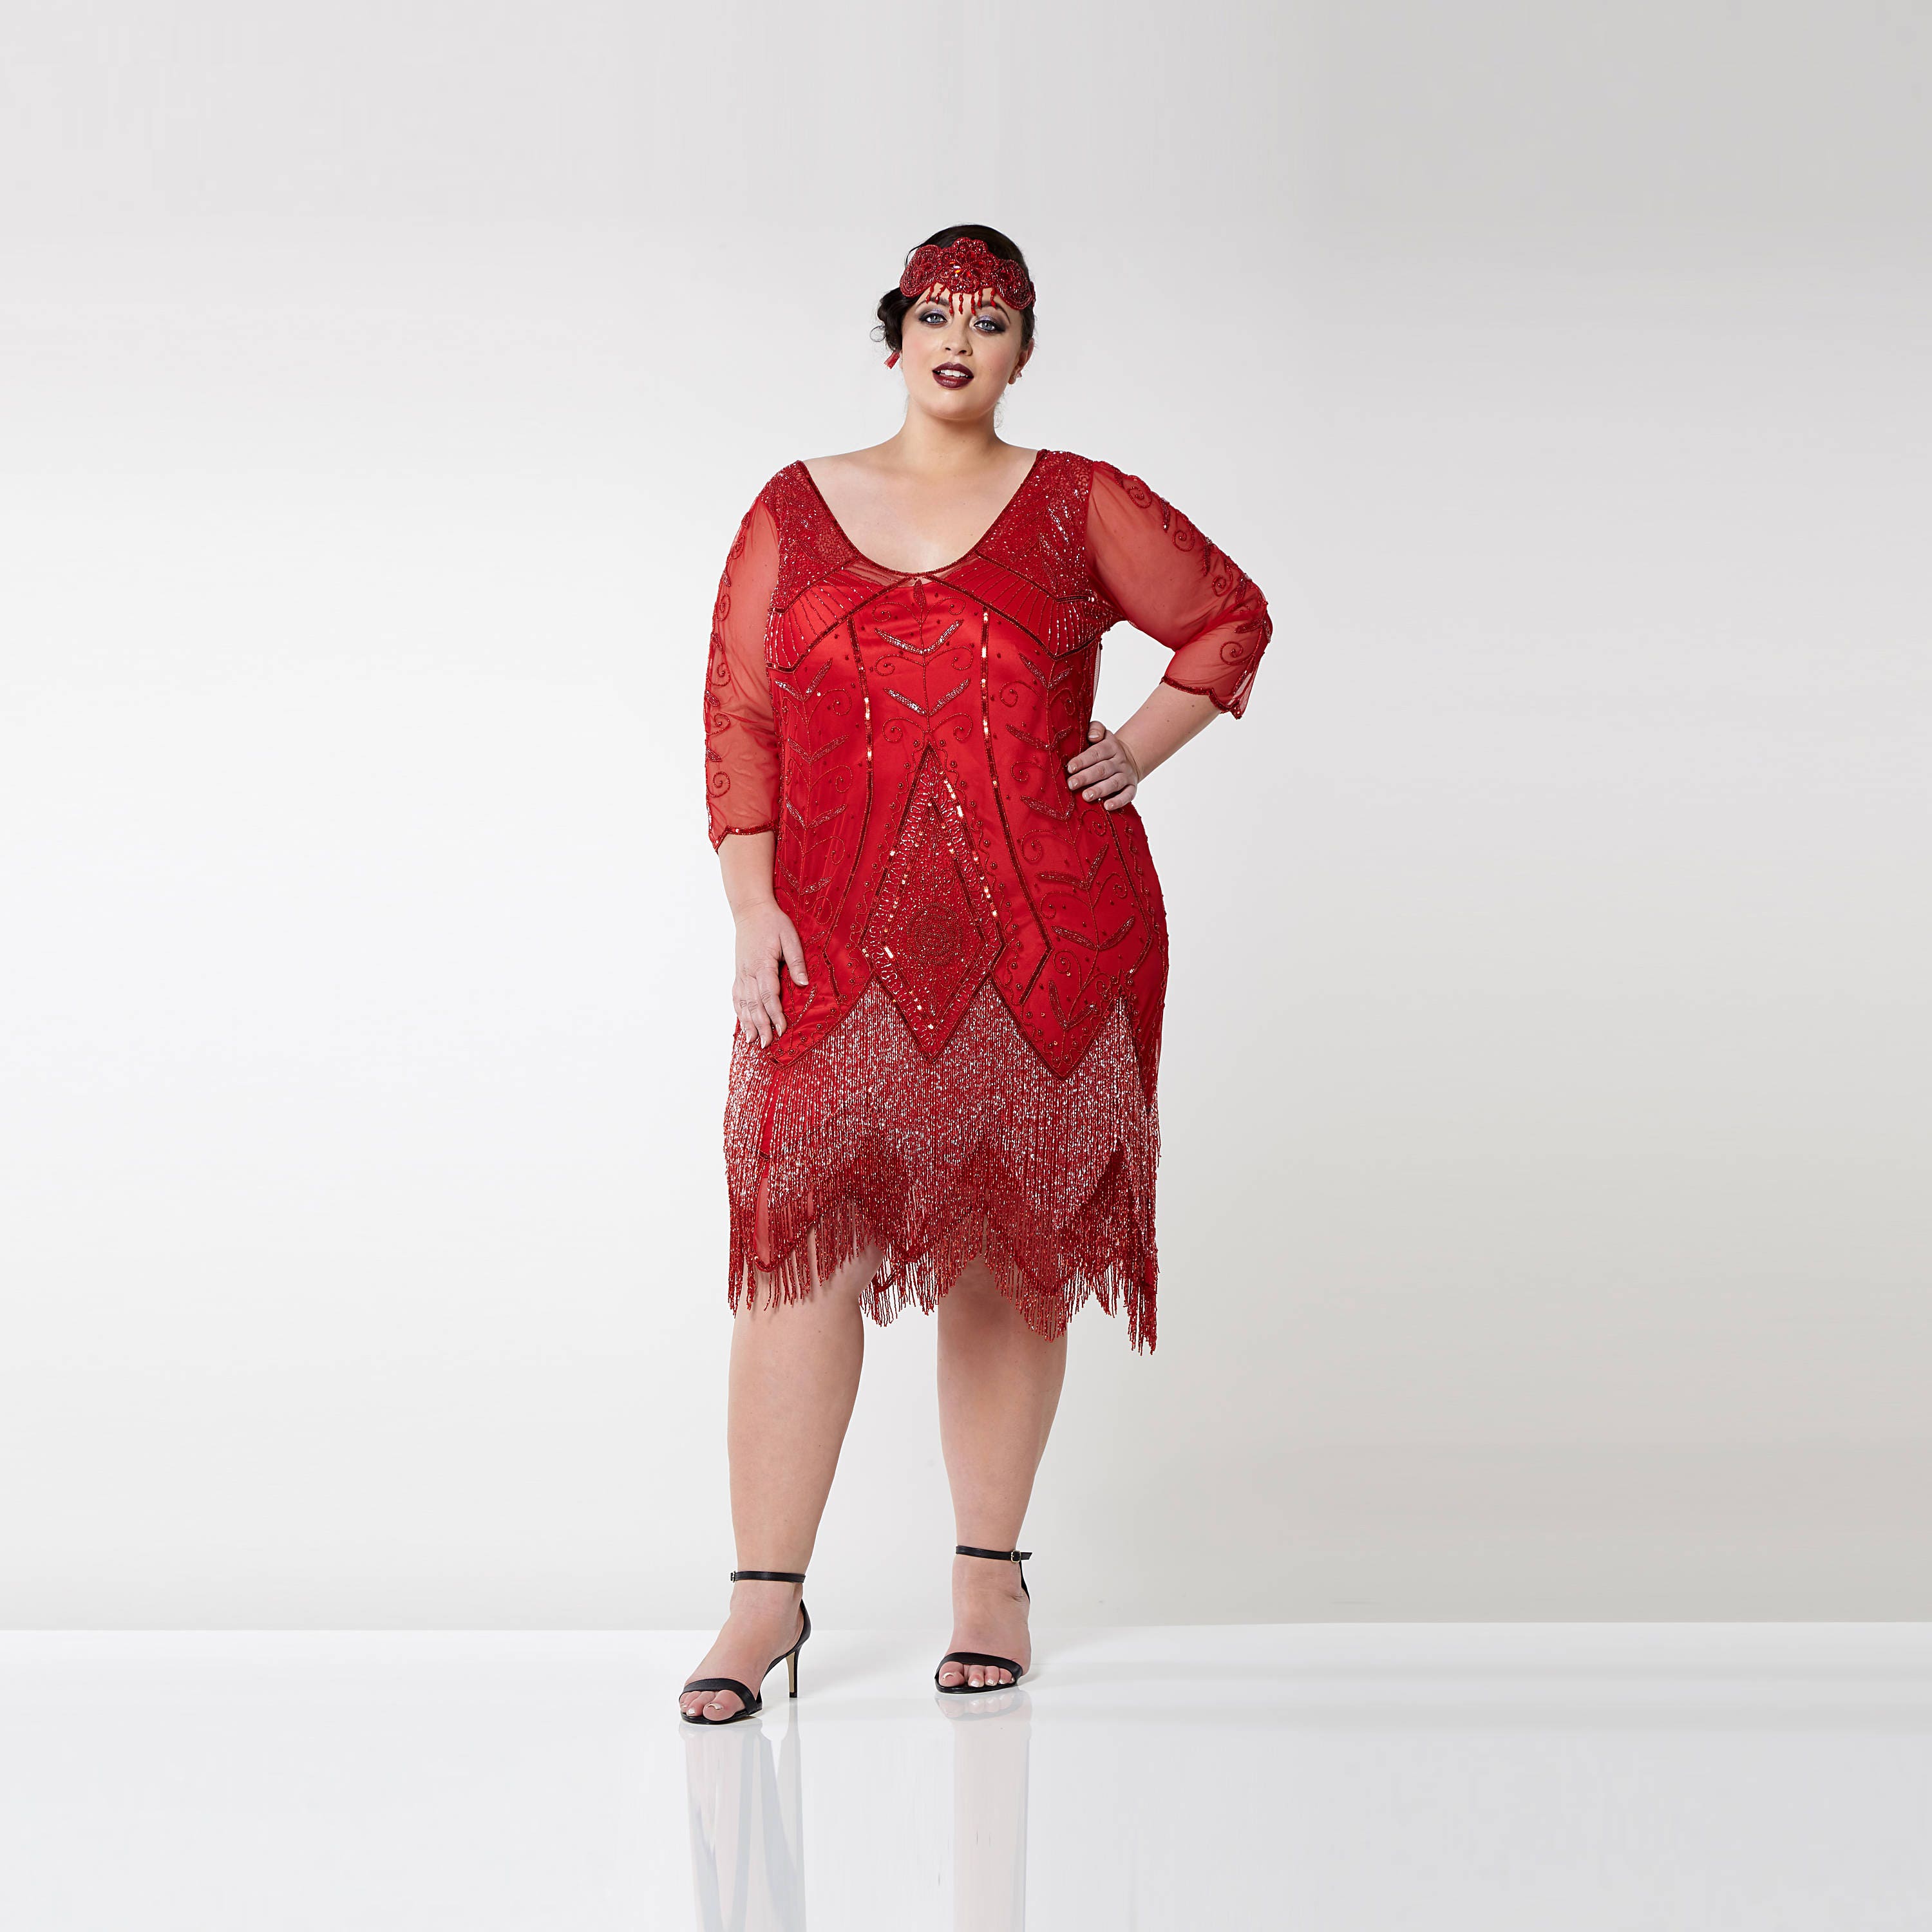 Plus Size Red Dress With Slip Included -